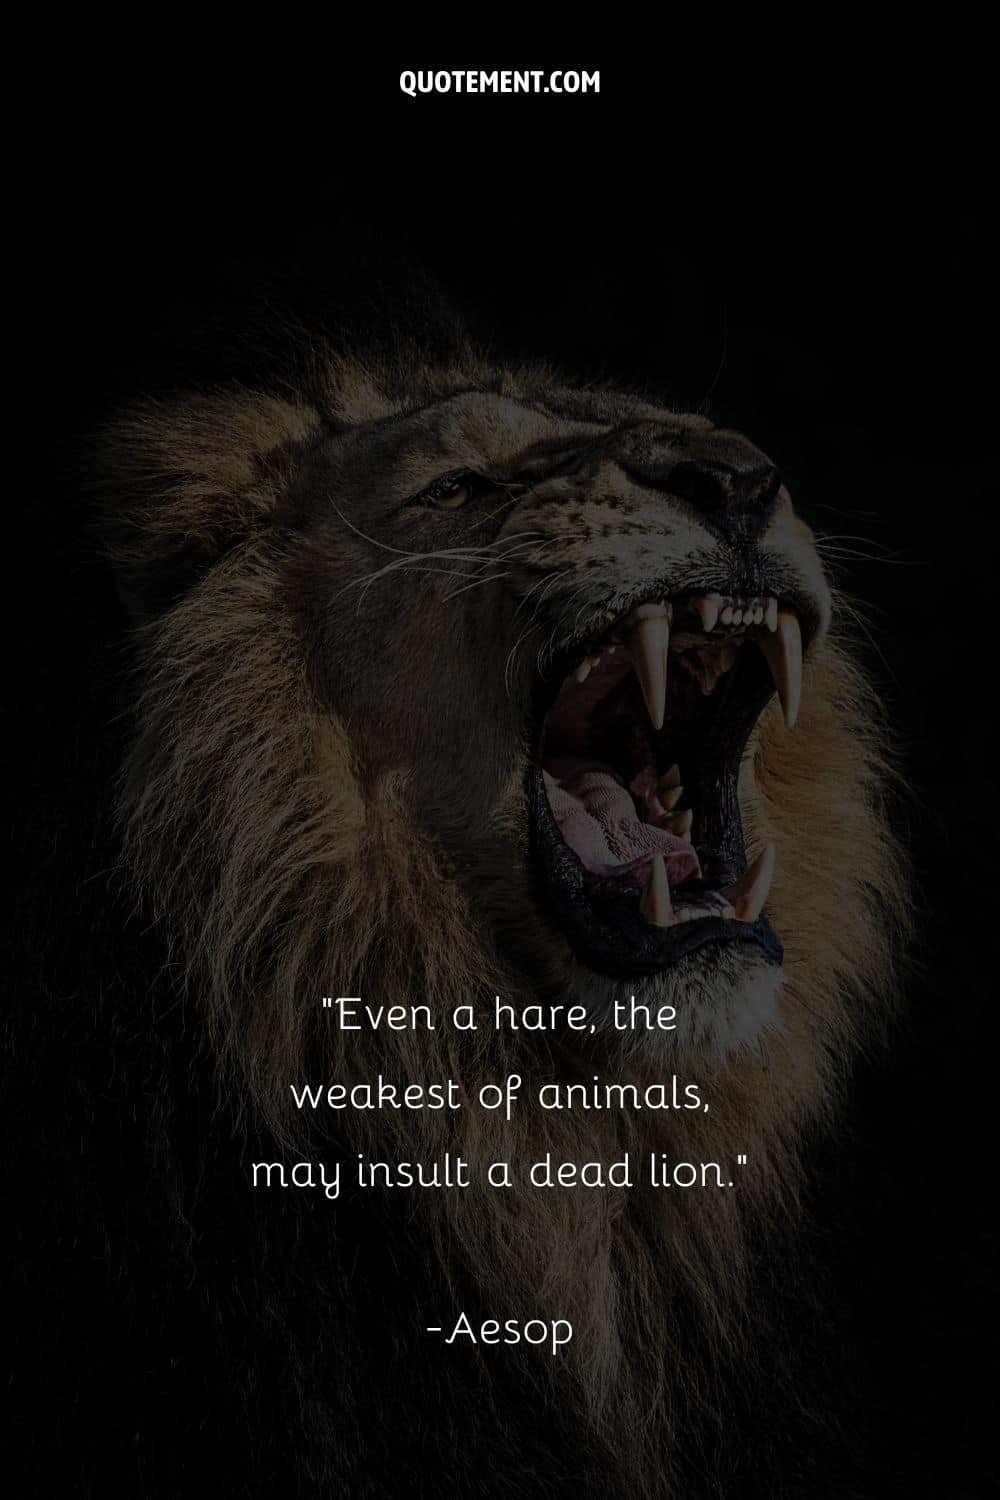 Even a hare, the weakest of animals, may insult a dead lion